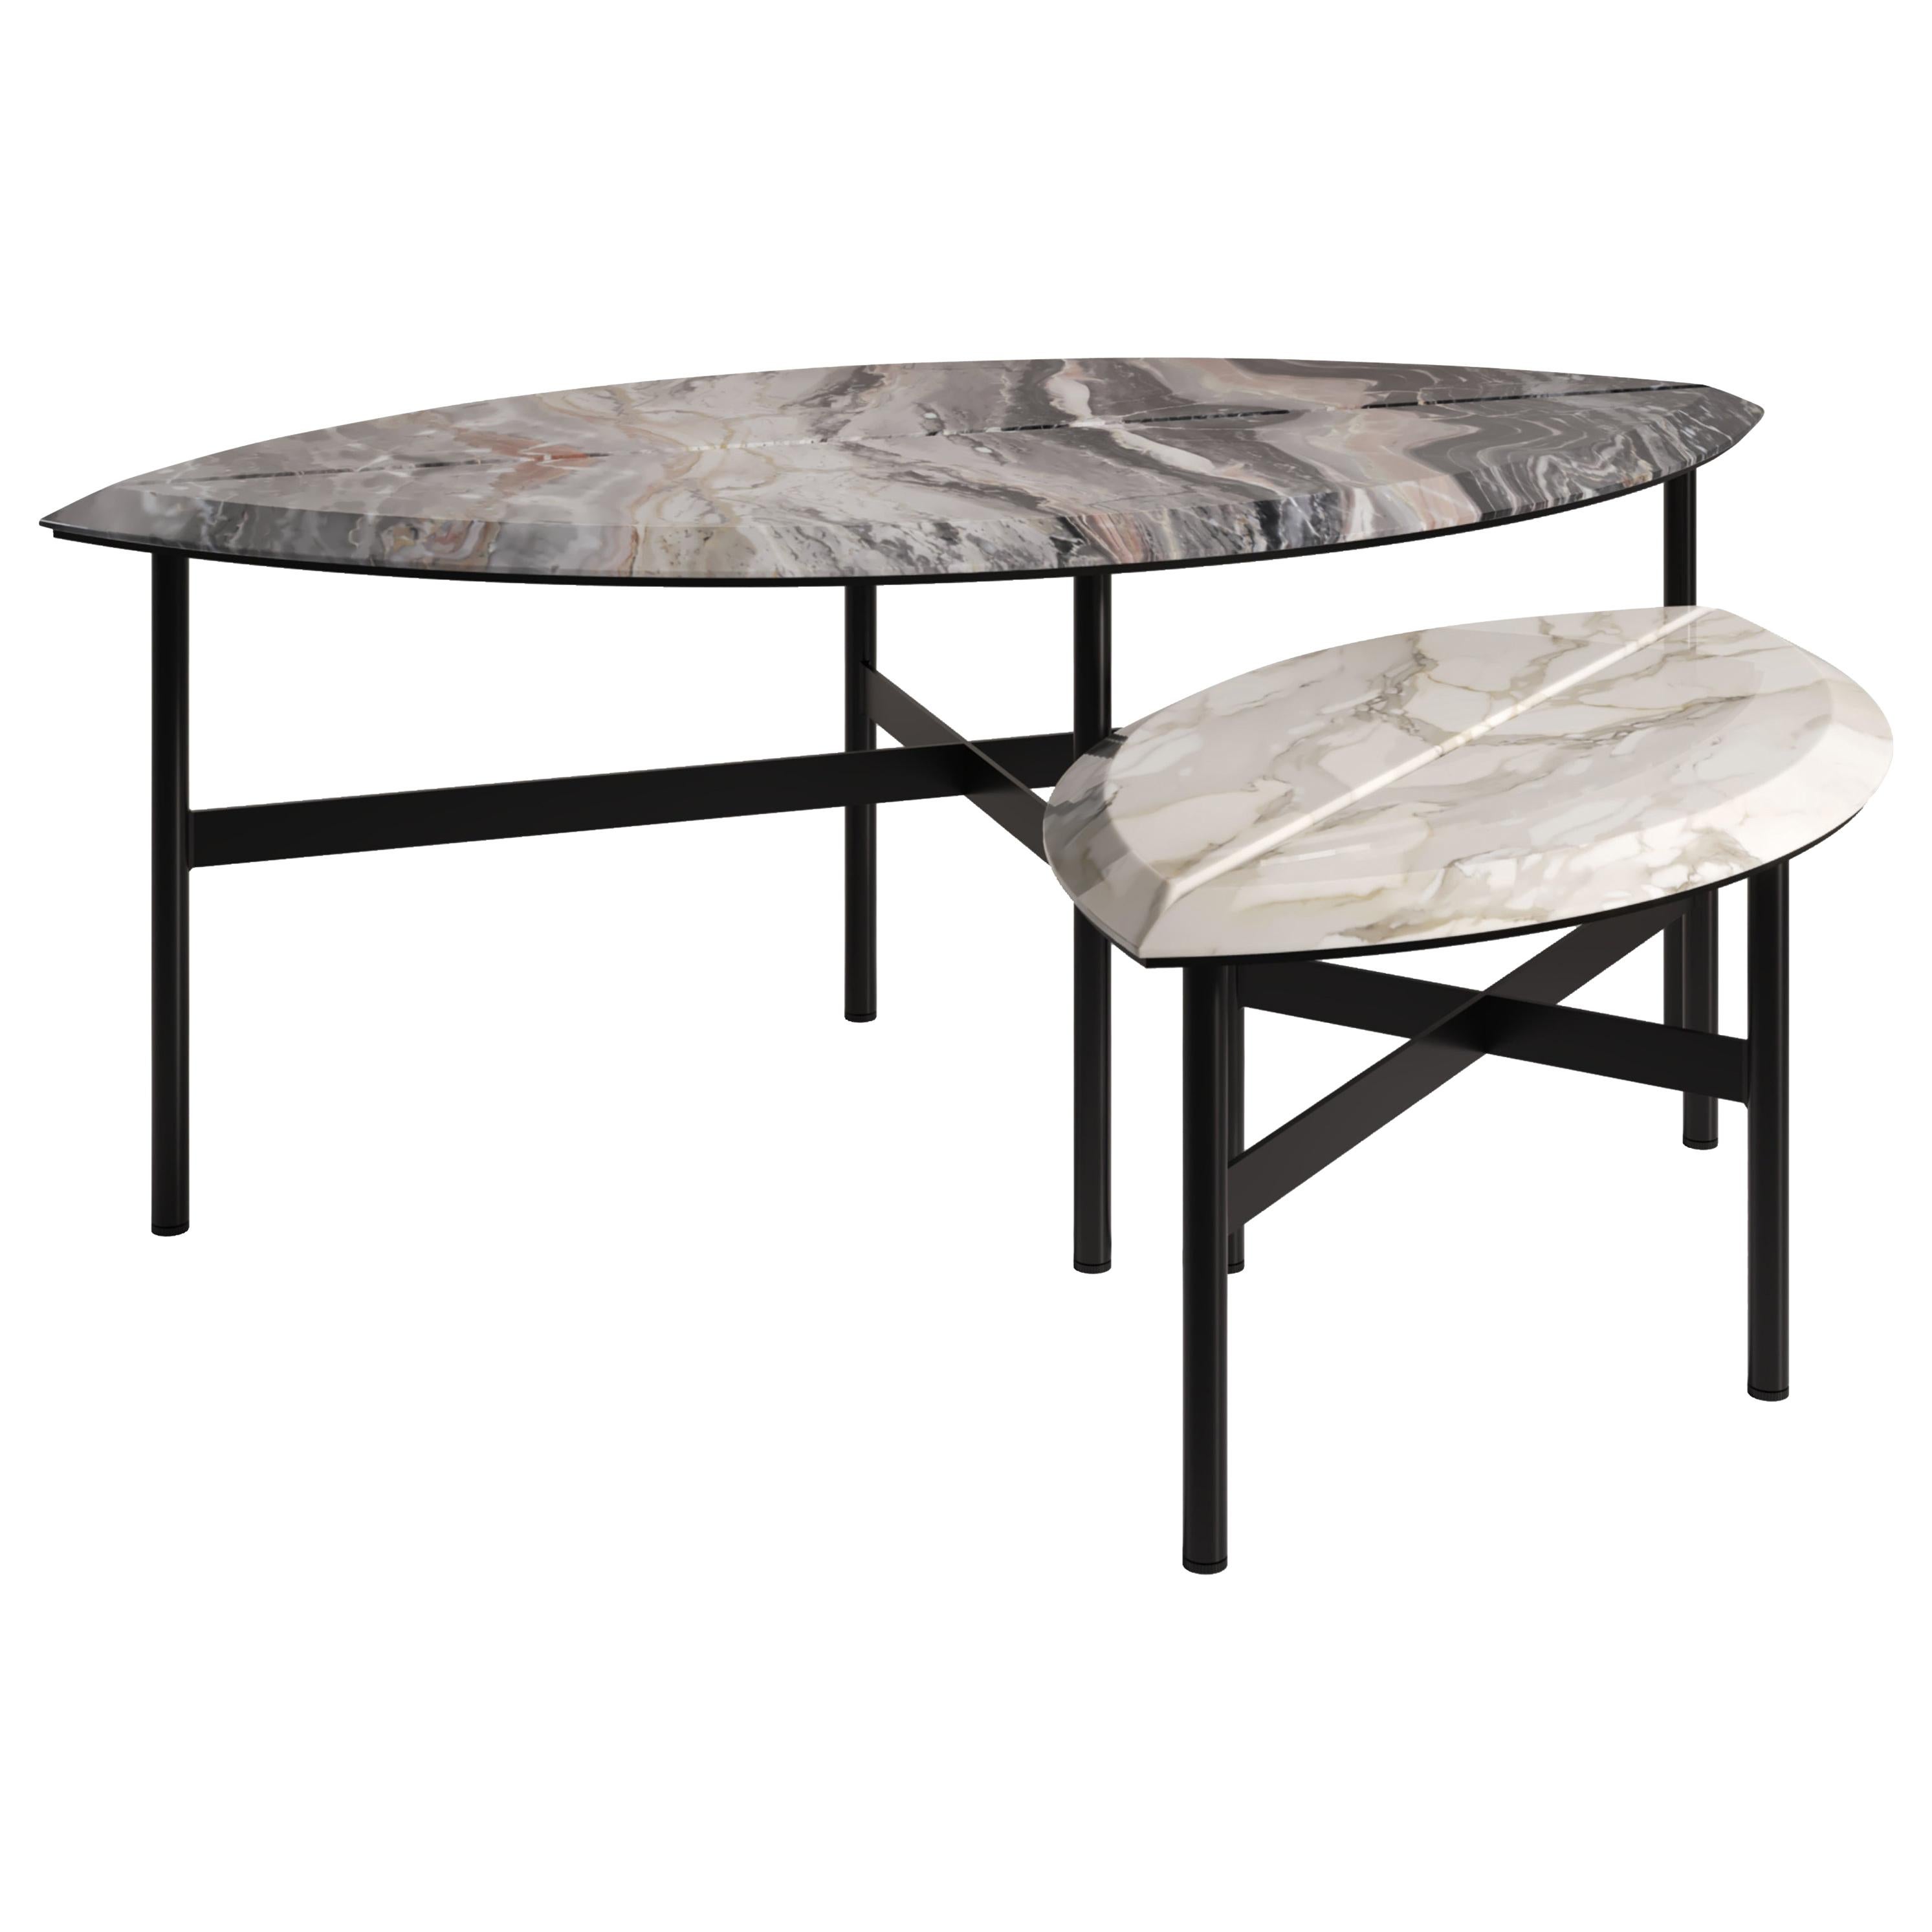 BOOK 1&2 Set of Contemporary Coffee Tables For Sale